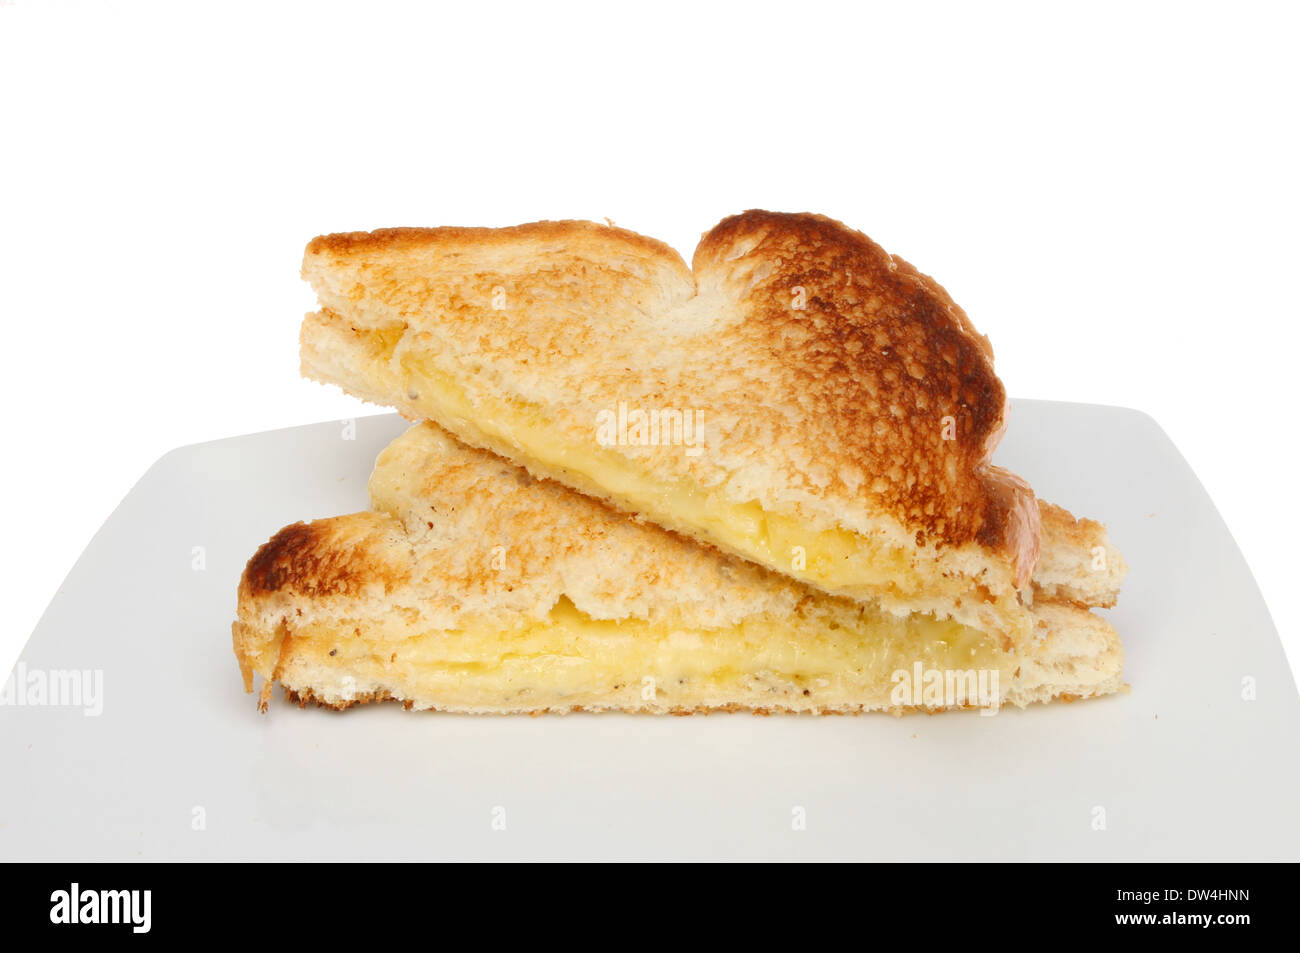 Toasted Cheddar cheese sandwich on a plate against a white background Stock Photo